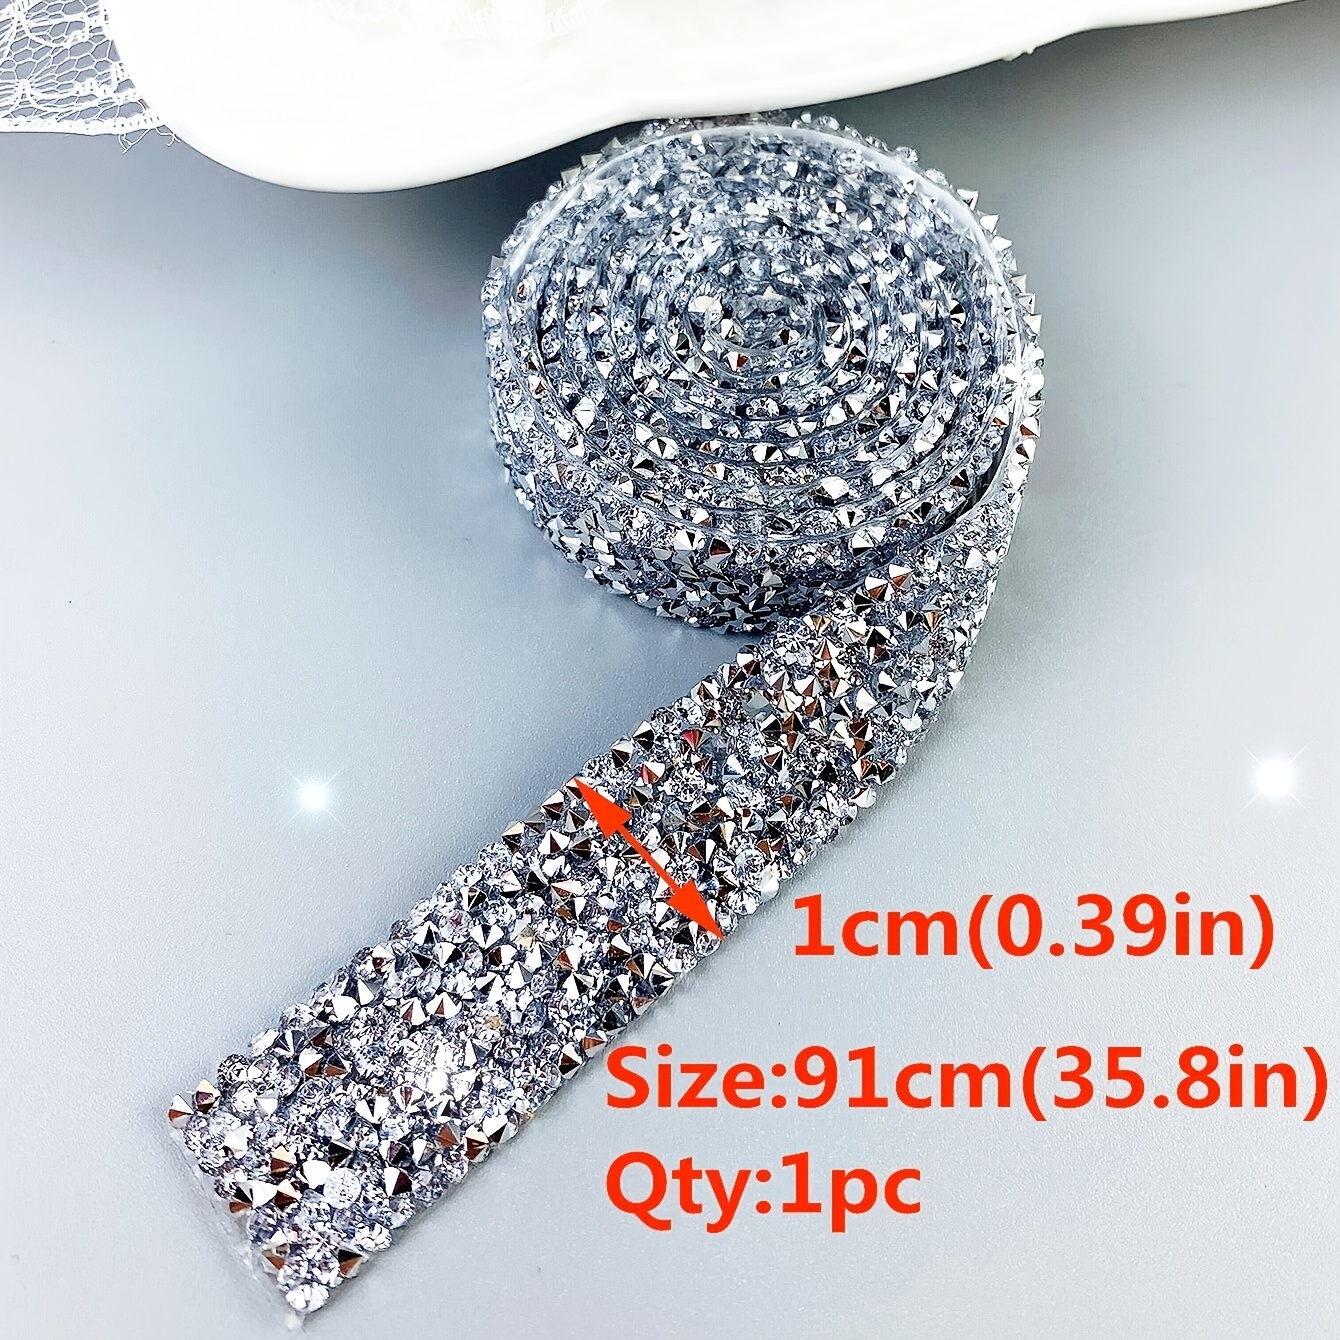 Crystal Ab Ss16 Ss20 Hight Quality Hot Fix Artificial Rhinestone